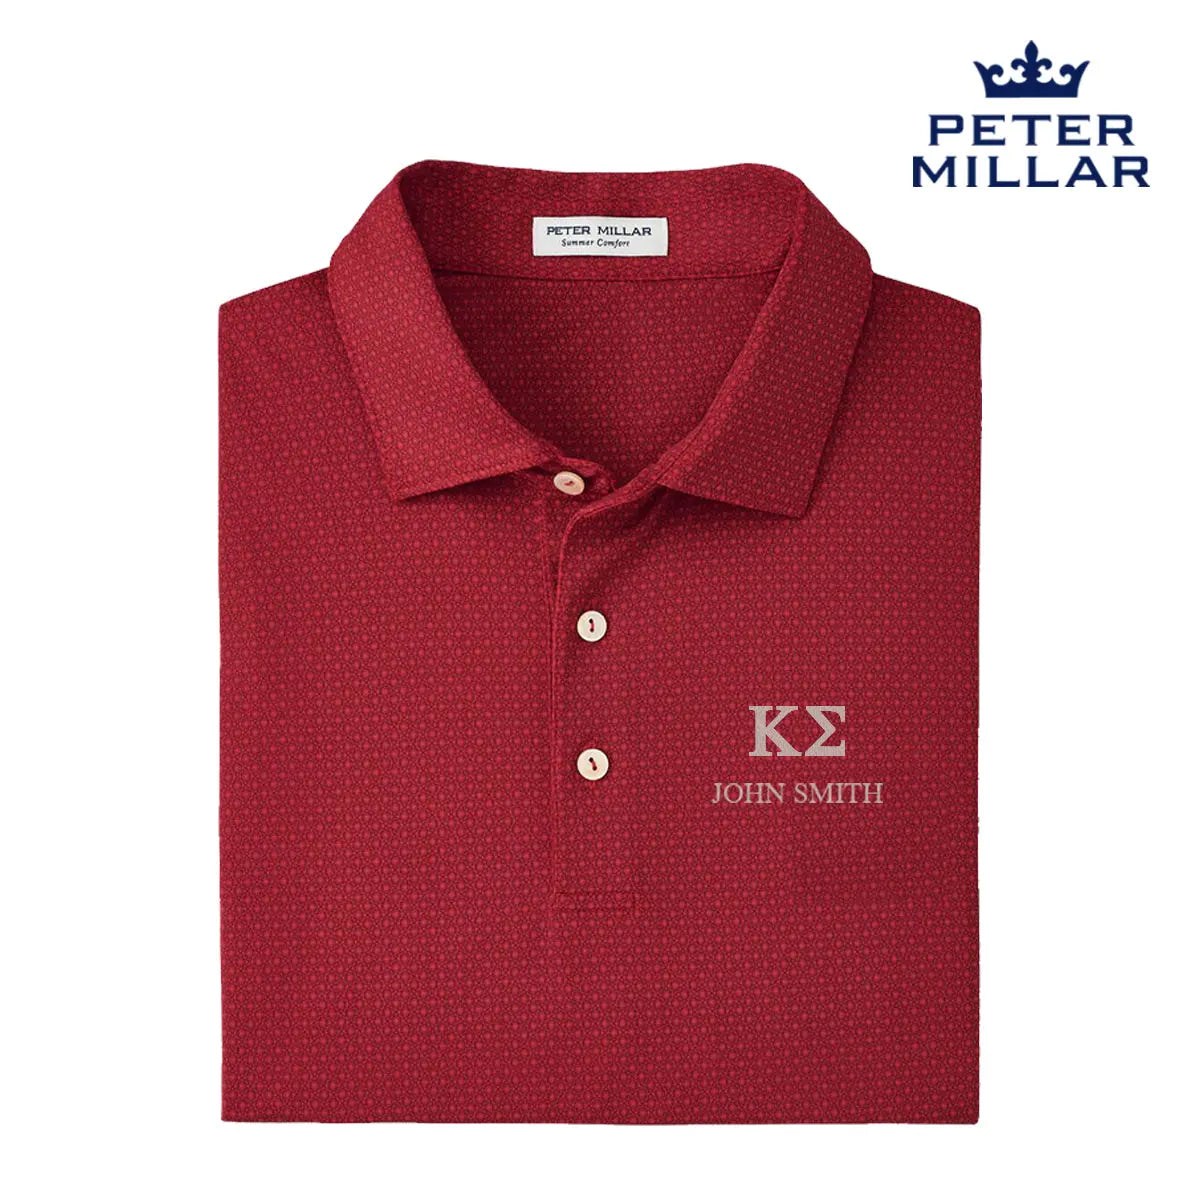 New! Kappa Sig Personalized Peter Millar Tesseract Patterned Polo With Greek Letters Kappa Sigma